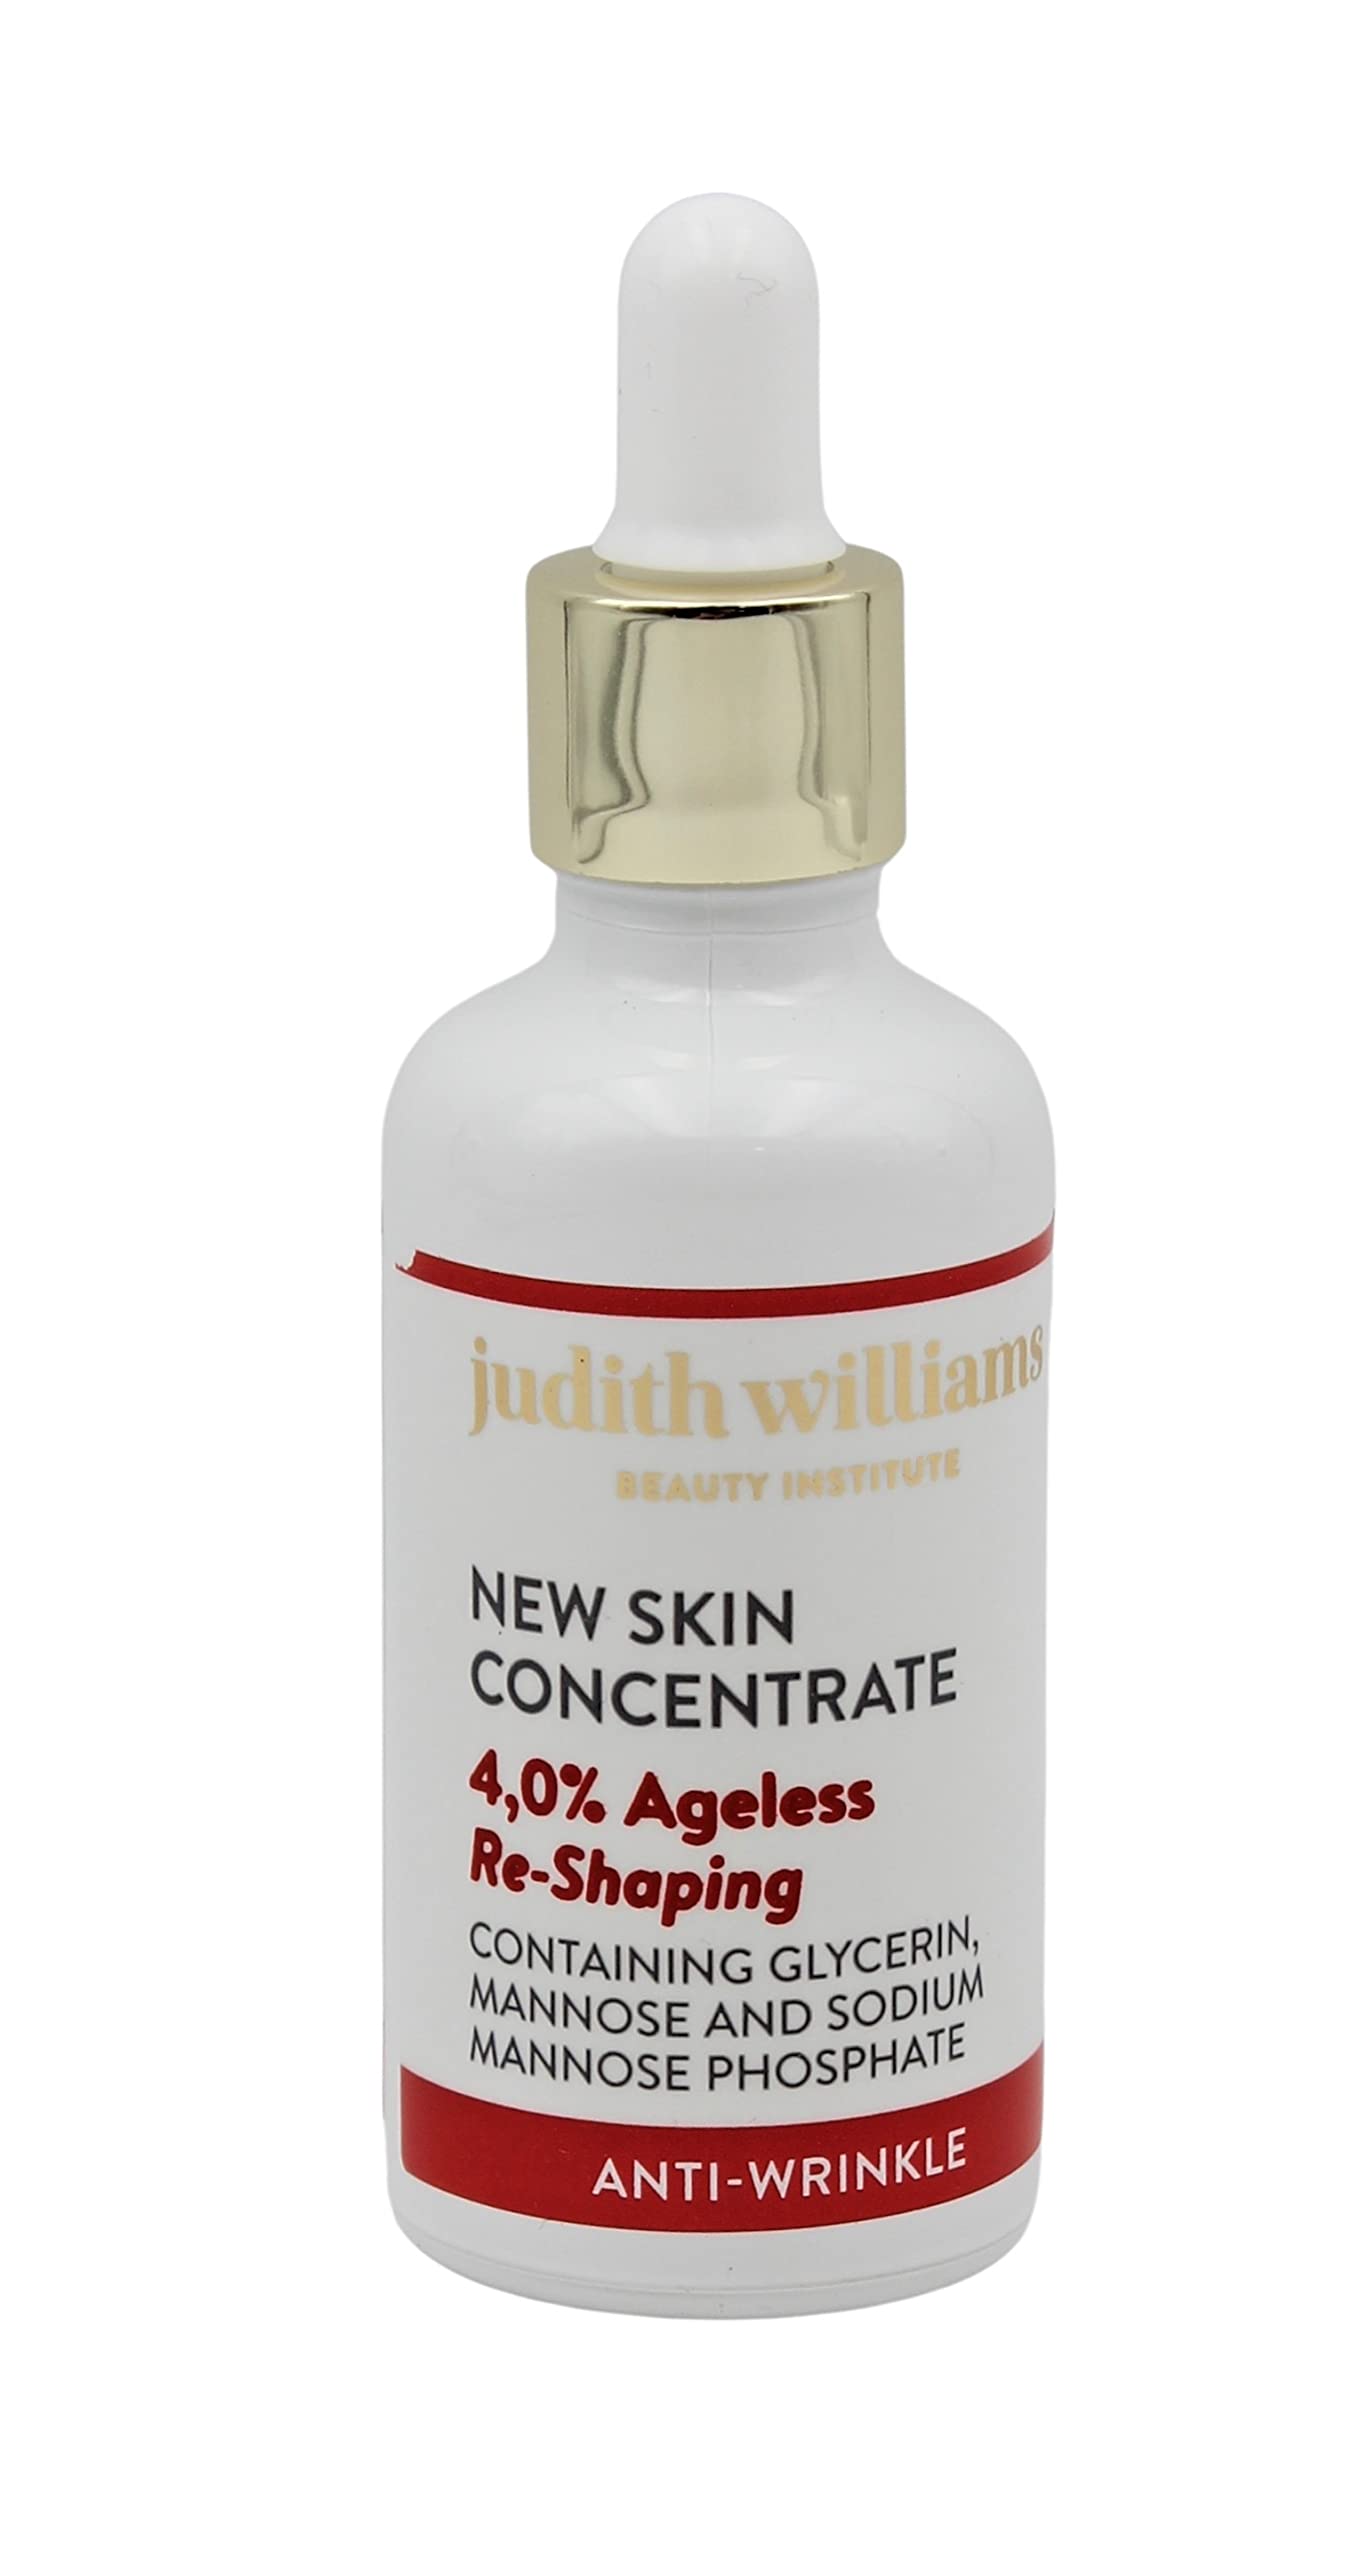 Judith Williams Beauty Institute New Skin Concentrate 50ml - 4,0% Ageless Re-Shaping